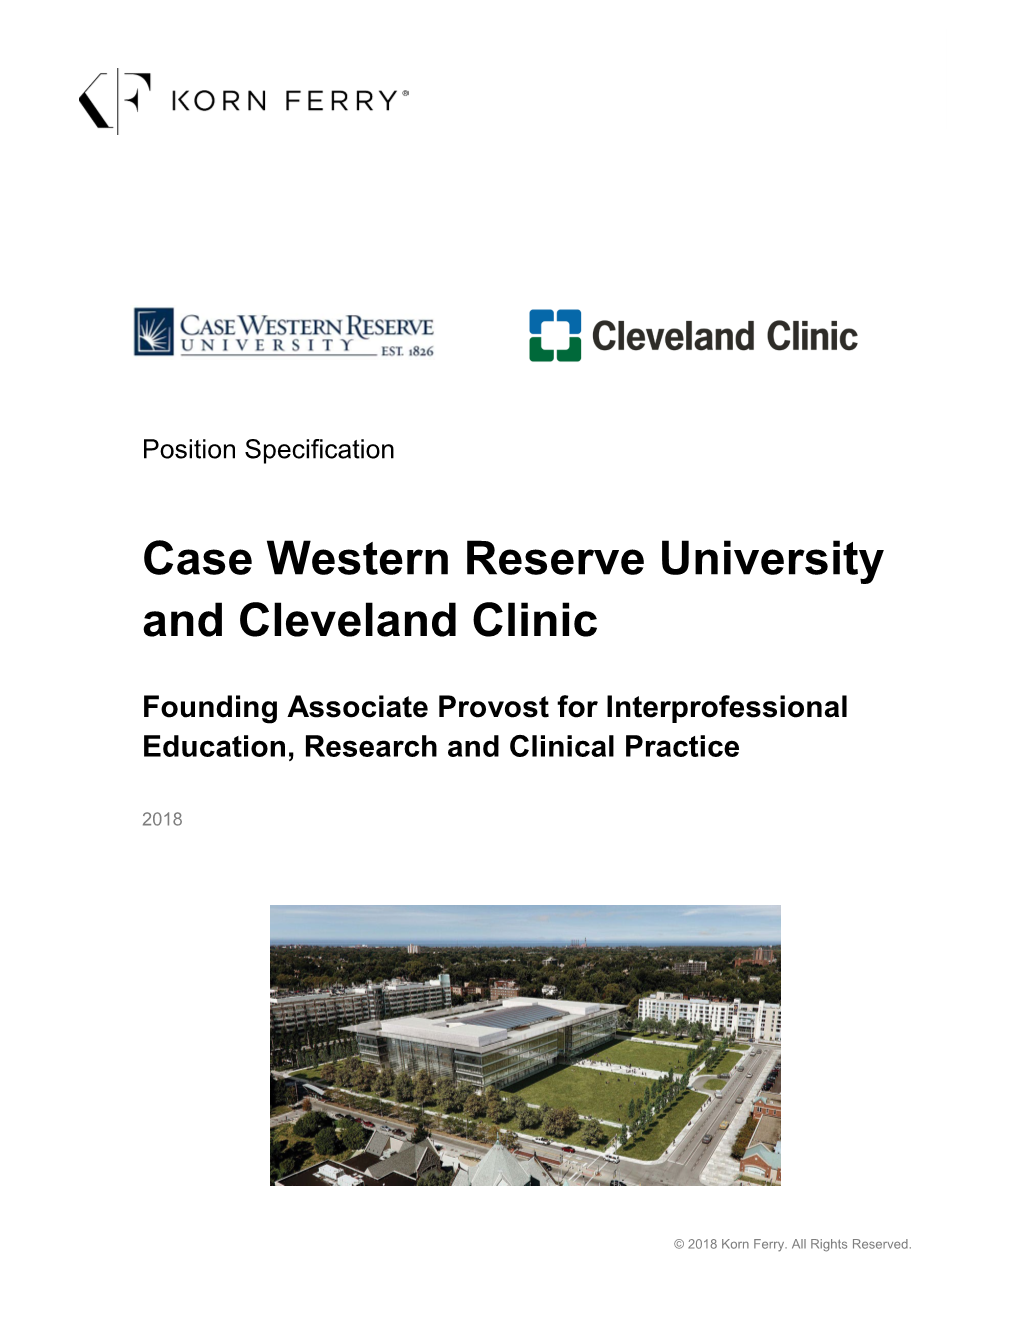 Case Western Reserve University and Cleveland Clinic Founding